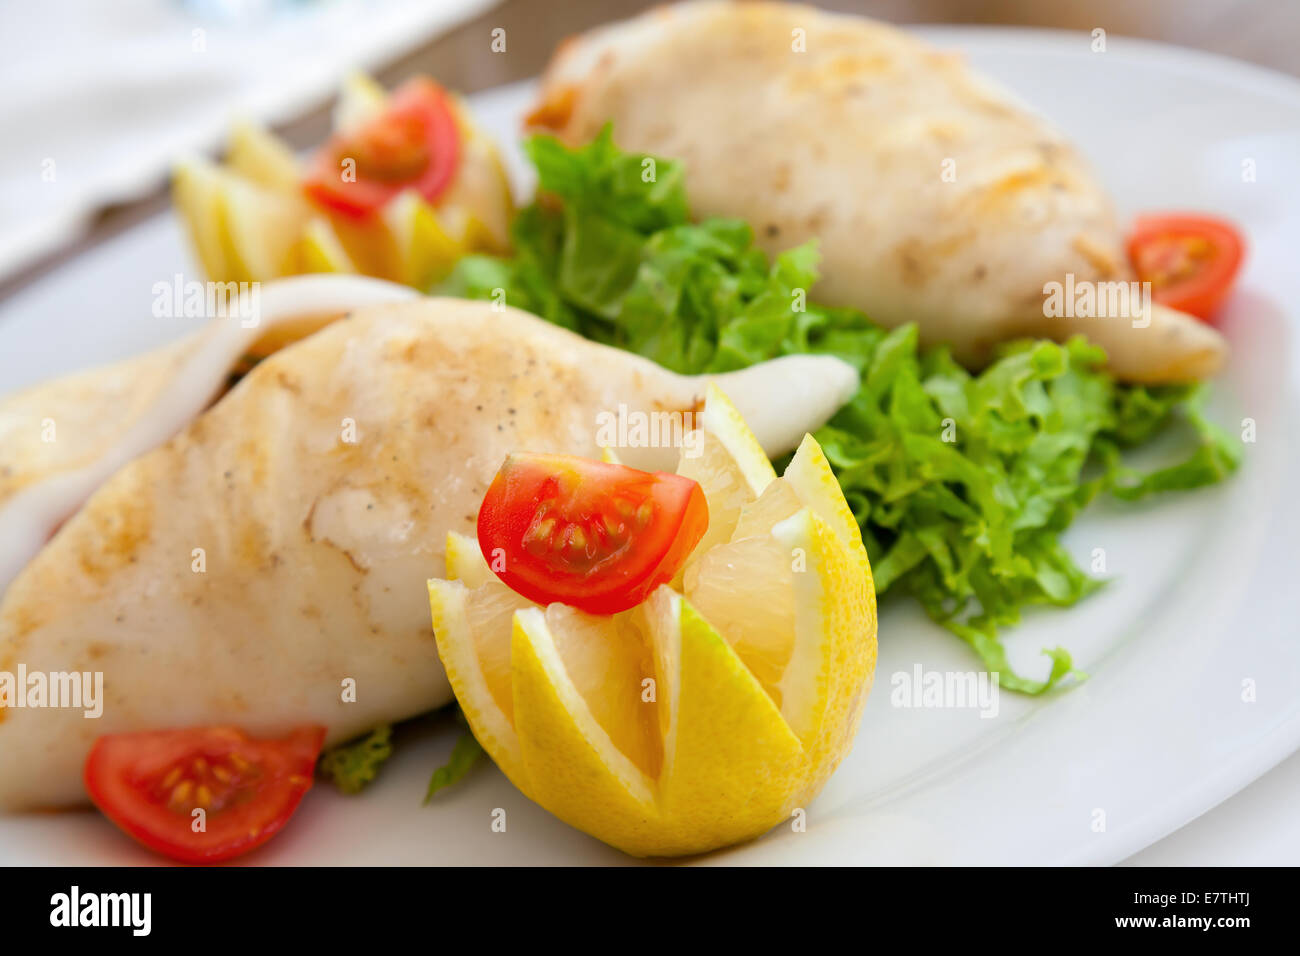 Squid stuffed with seafood on white plate in restaurant Stock Photo